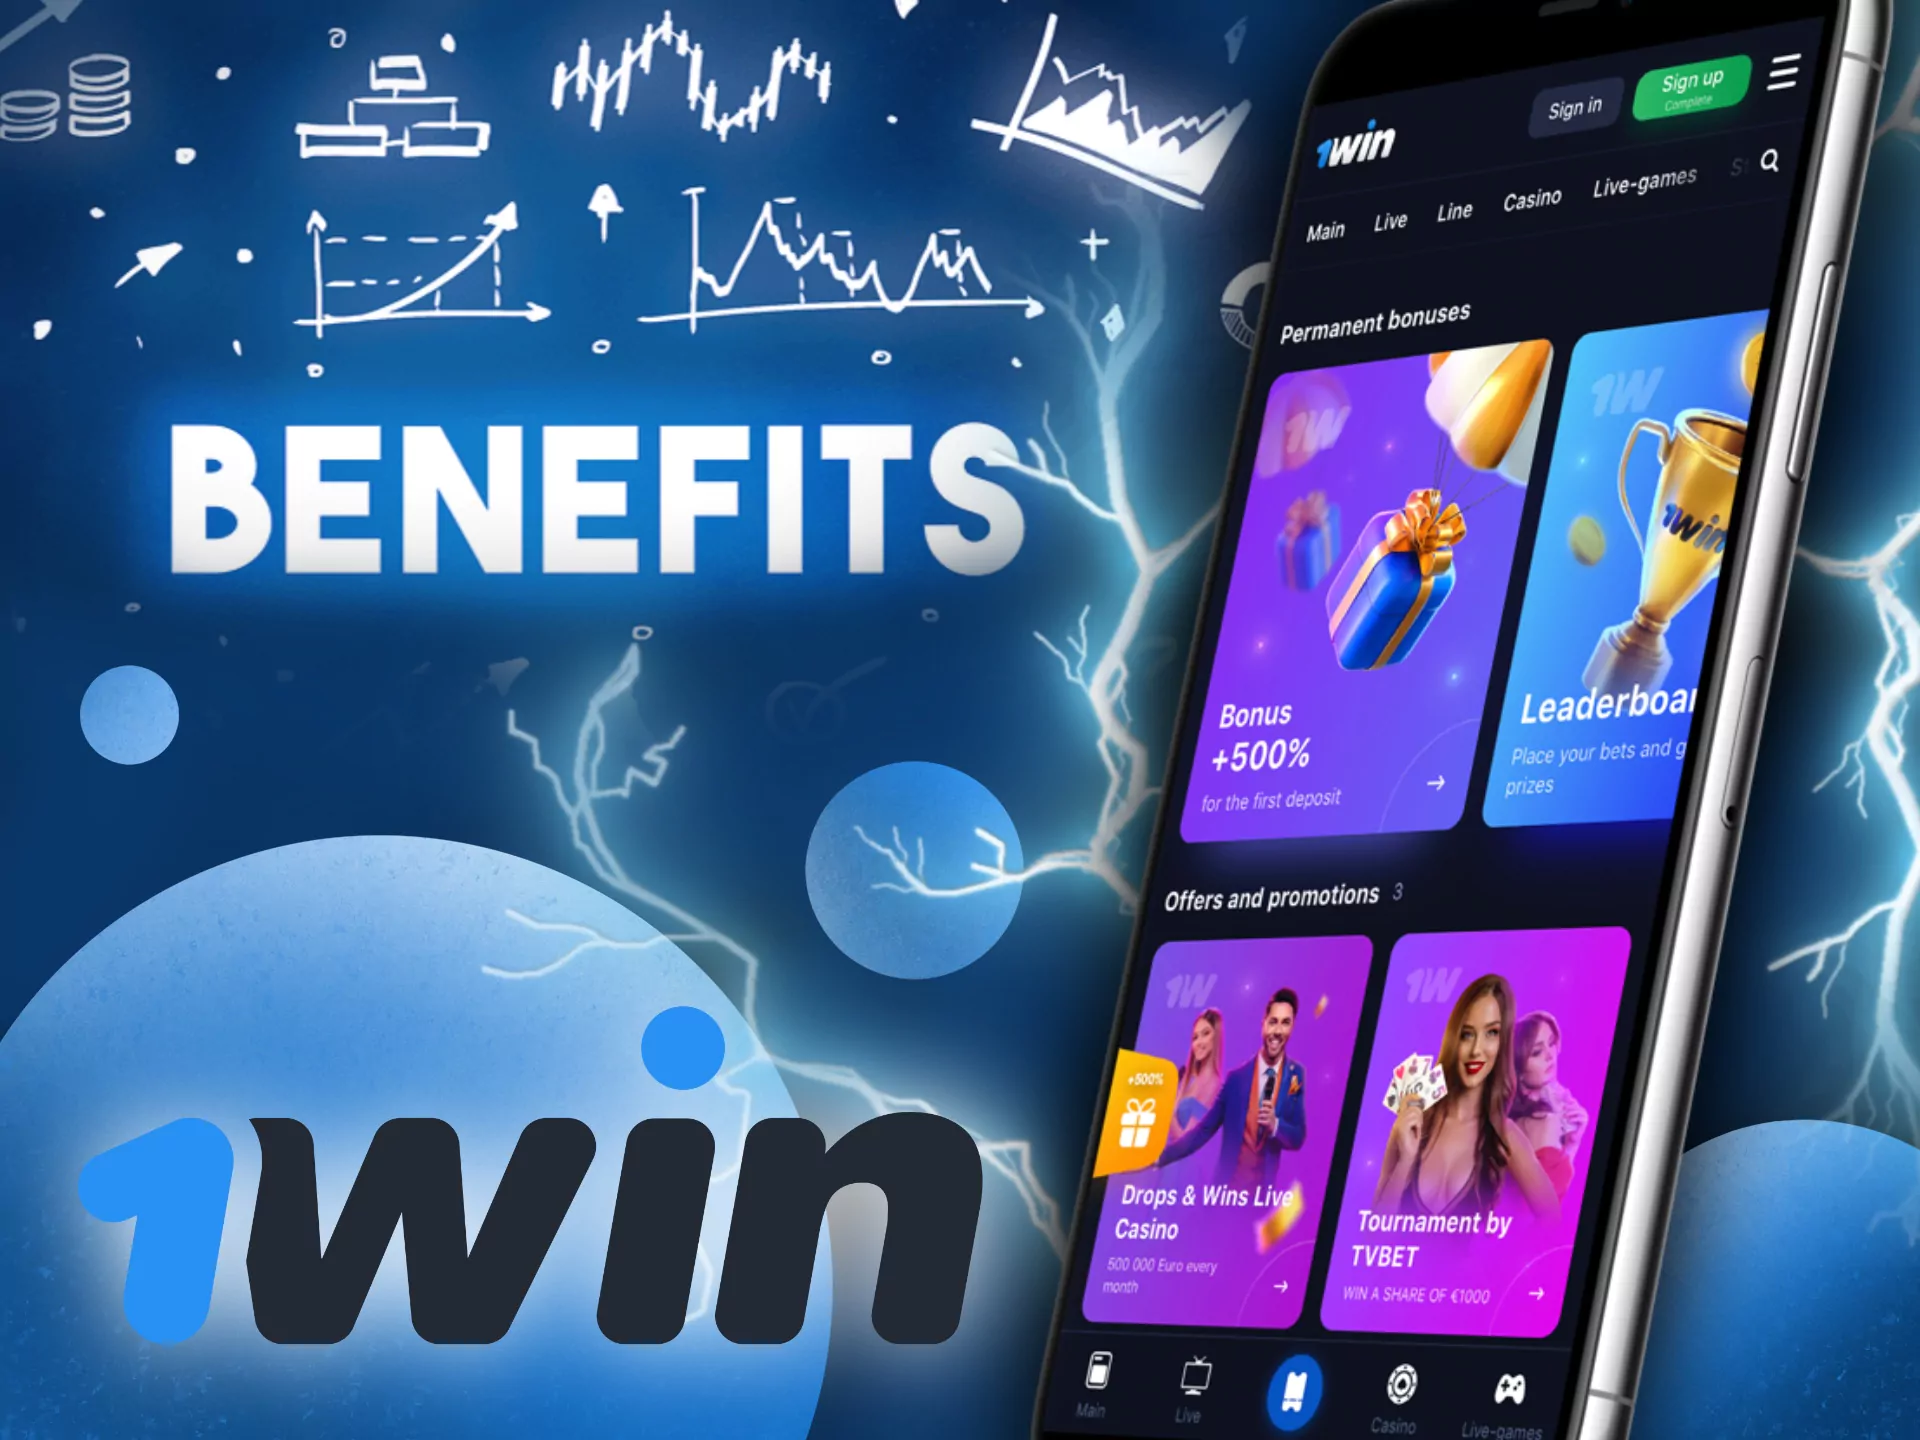 The benefits of the 1Win app make users prefer it to the mobile site version.